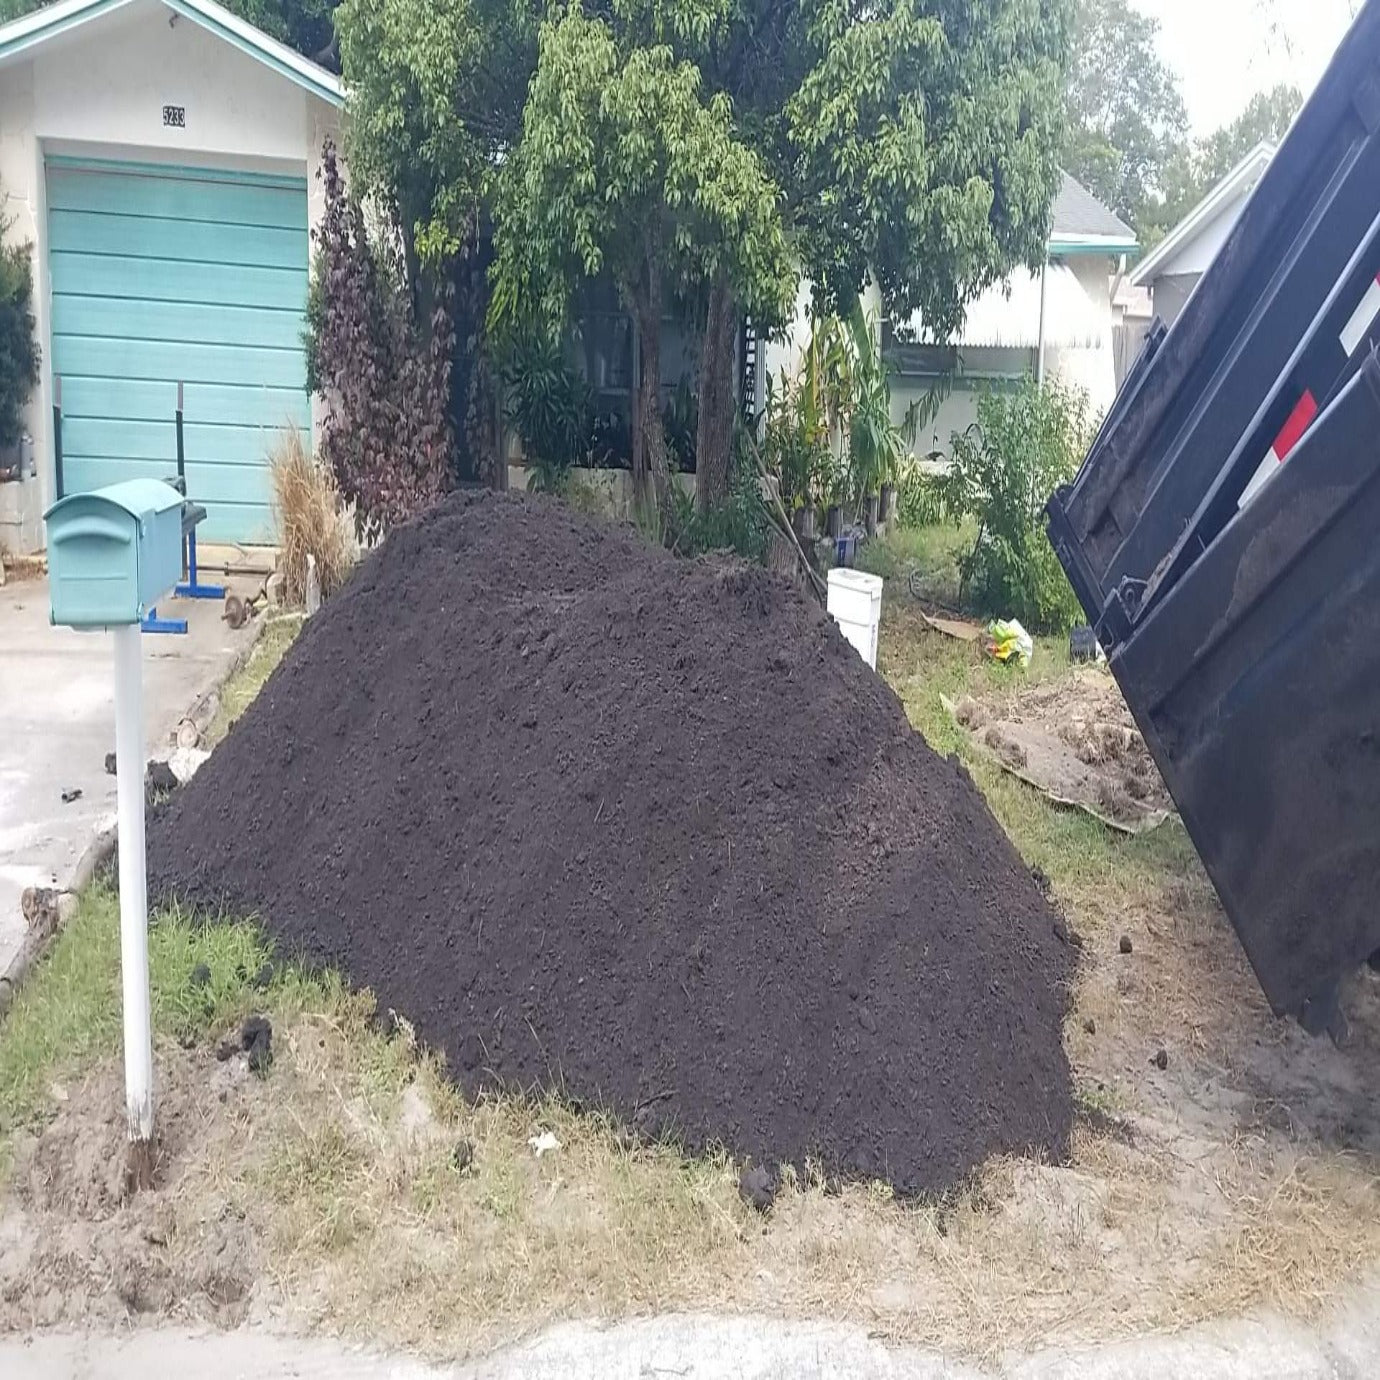 Bulk top soil delivery near me, bulk soil delivered to the front yard.